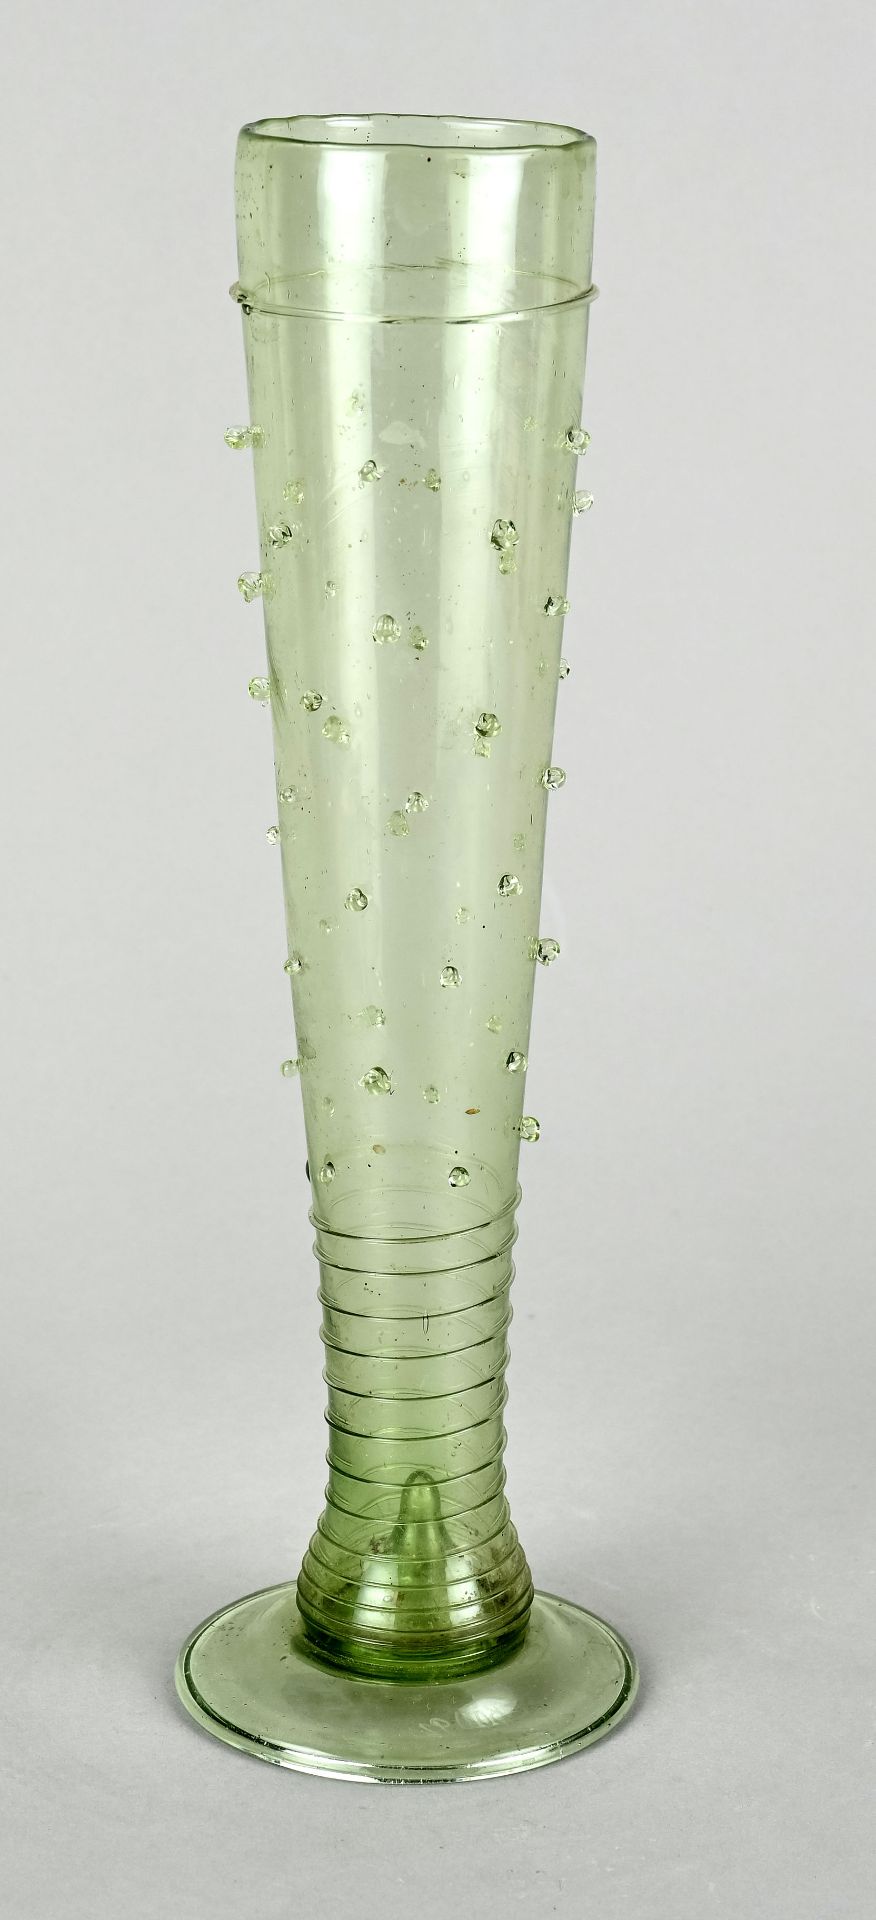 Glass, Germany/Austria, 19th century, "Noppenglas", light green glass, B.O.N?, 92 signed, height 32